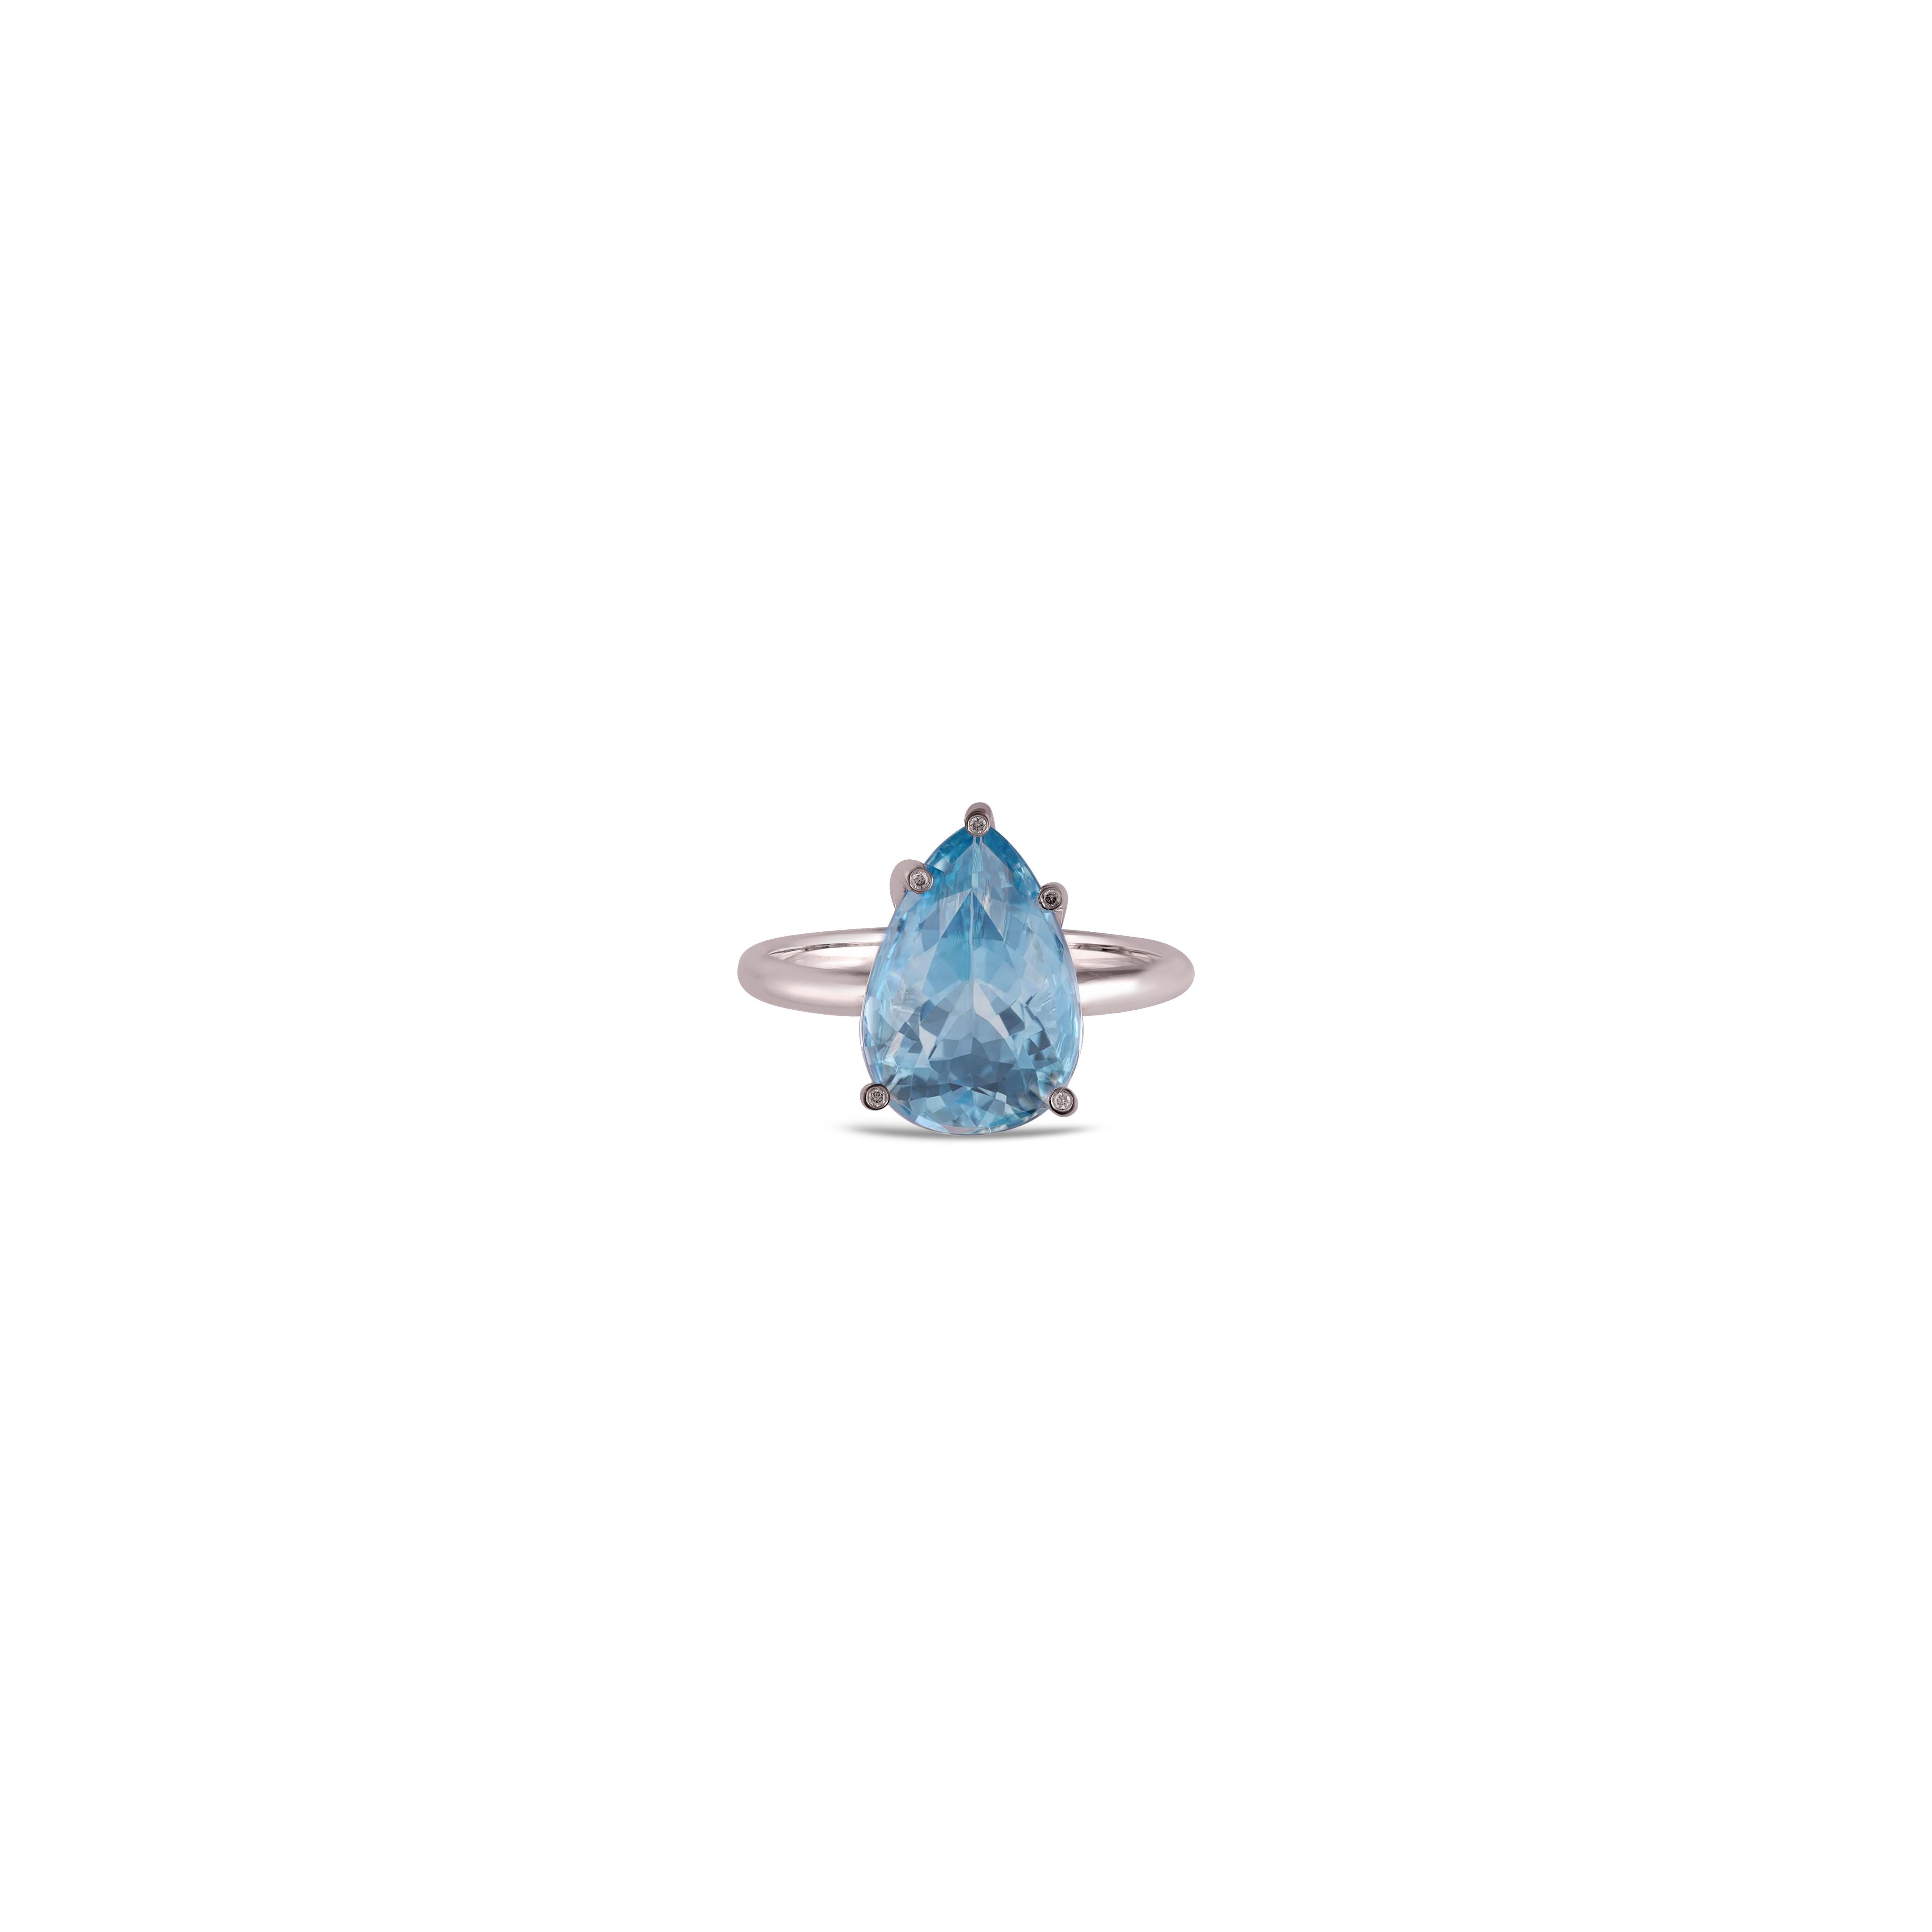 18K White Gold  Ring  with  1 Pear cut of Aquamarine 2.67 carats With 5 pcs of Diamond 0.02 Carat 

Custom Services
Resizing is available.
Request Customization



